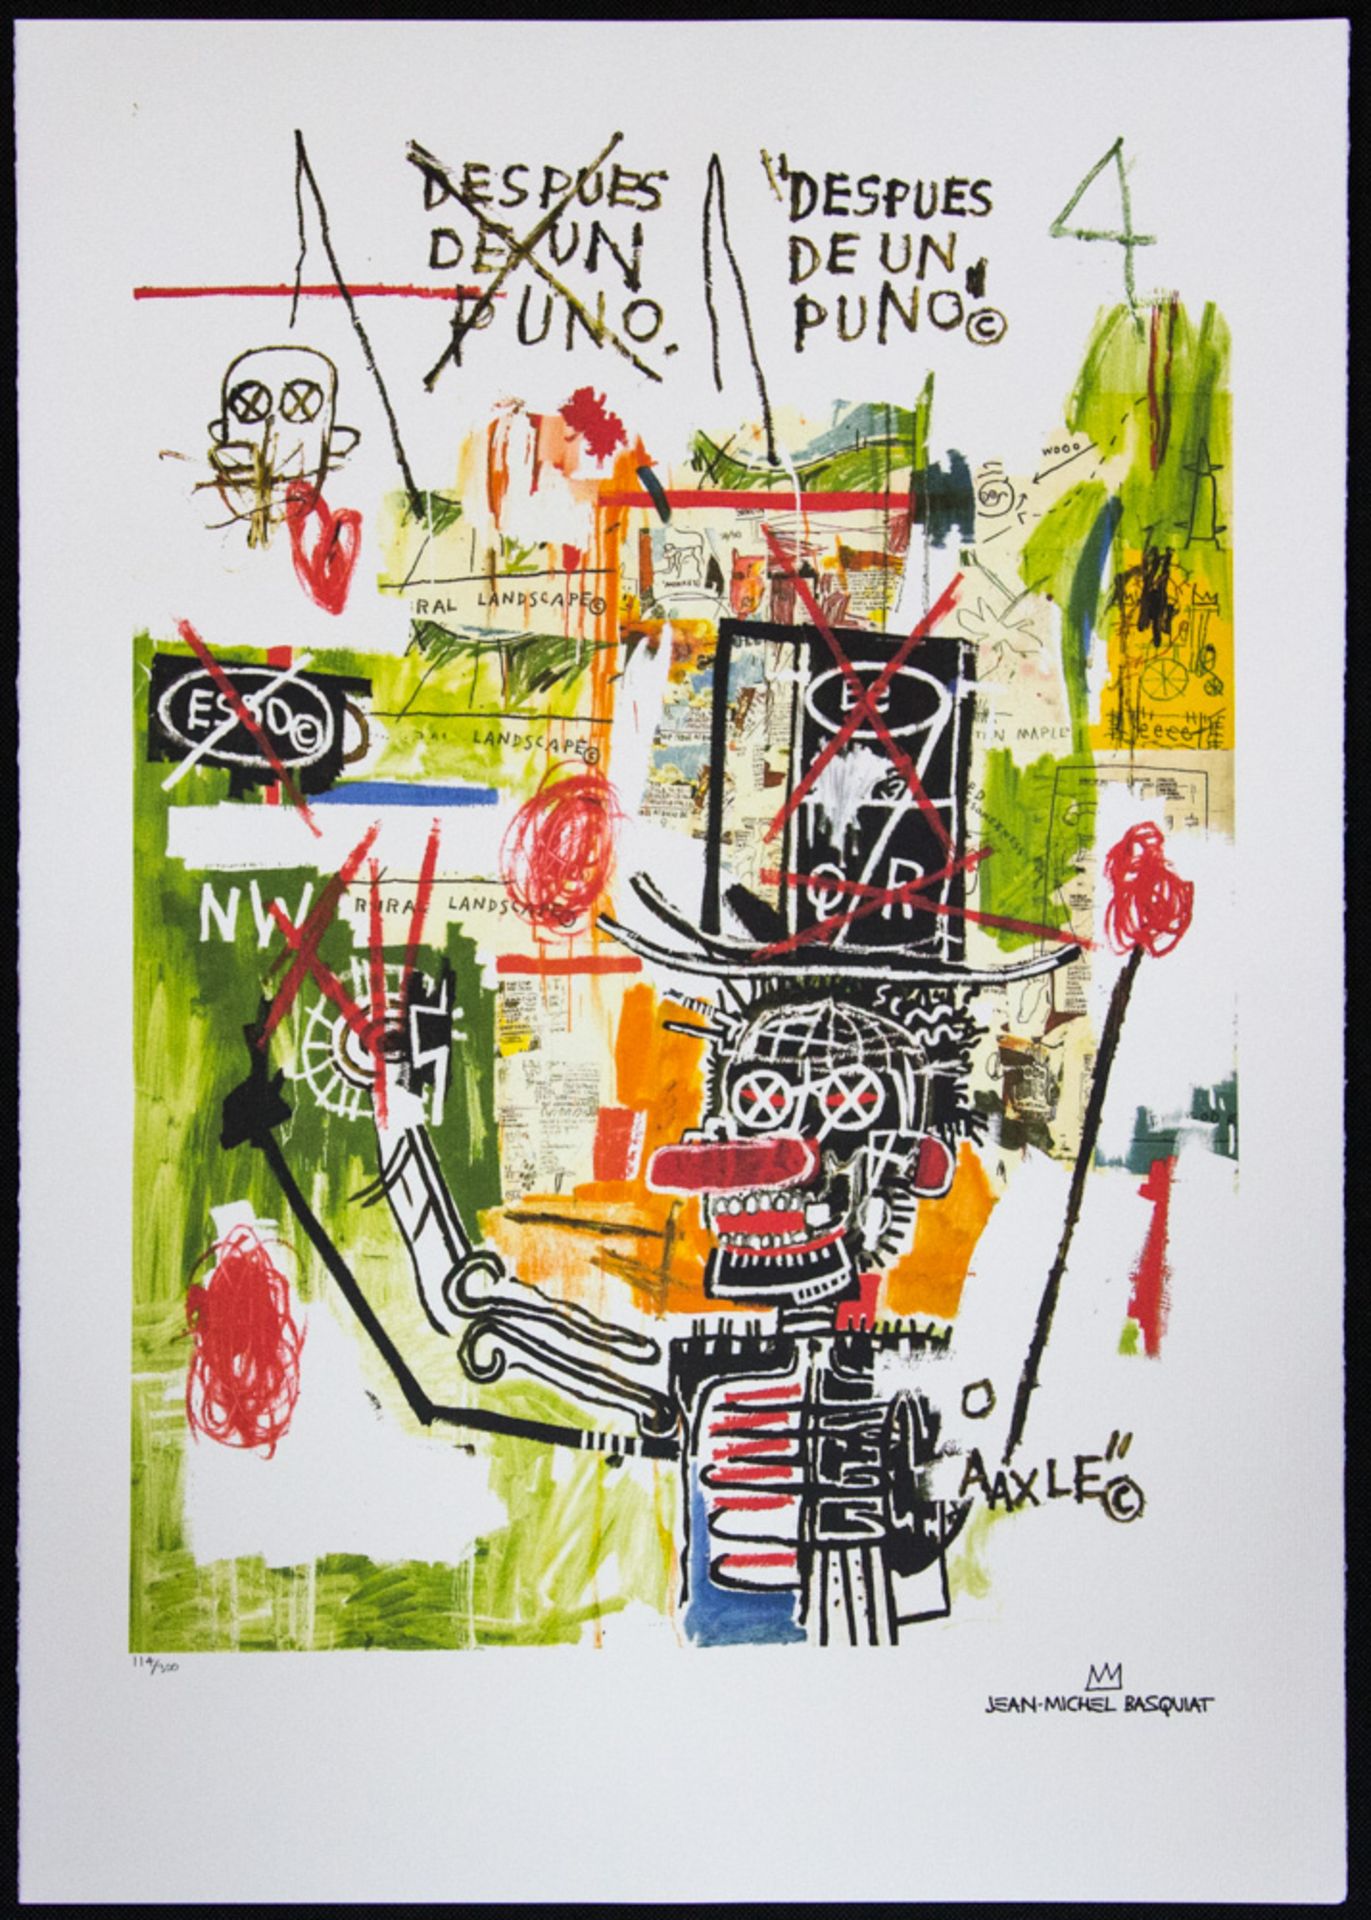 Jean-Michel Basquiat 'After Puno' - Image 2 of 5